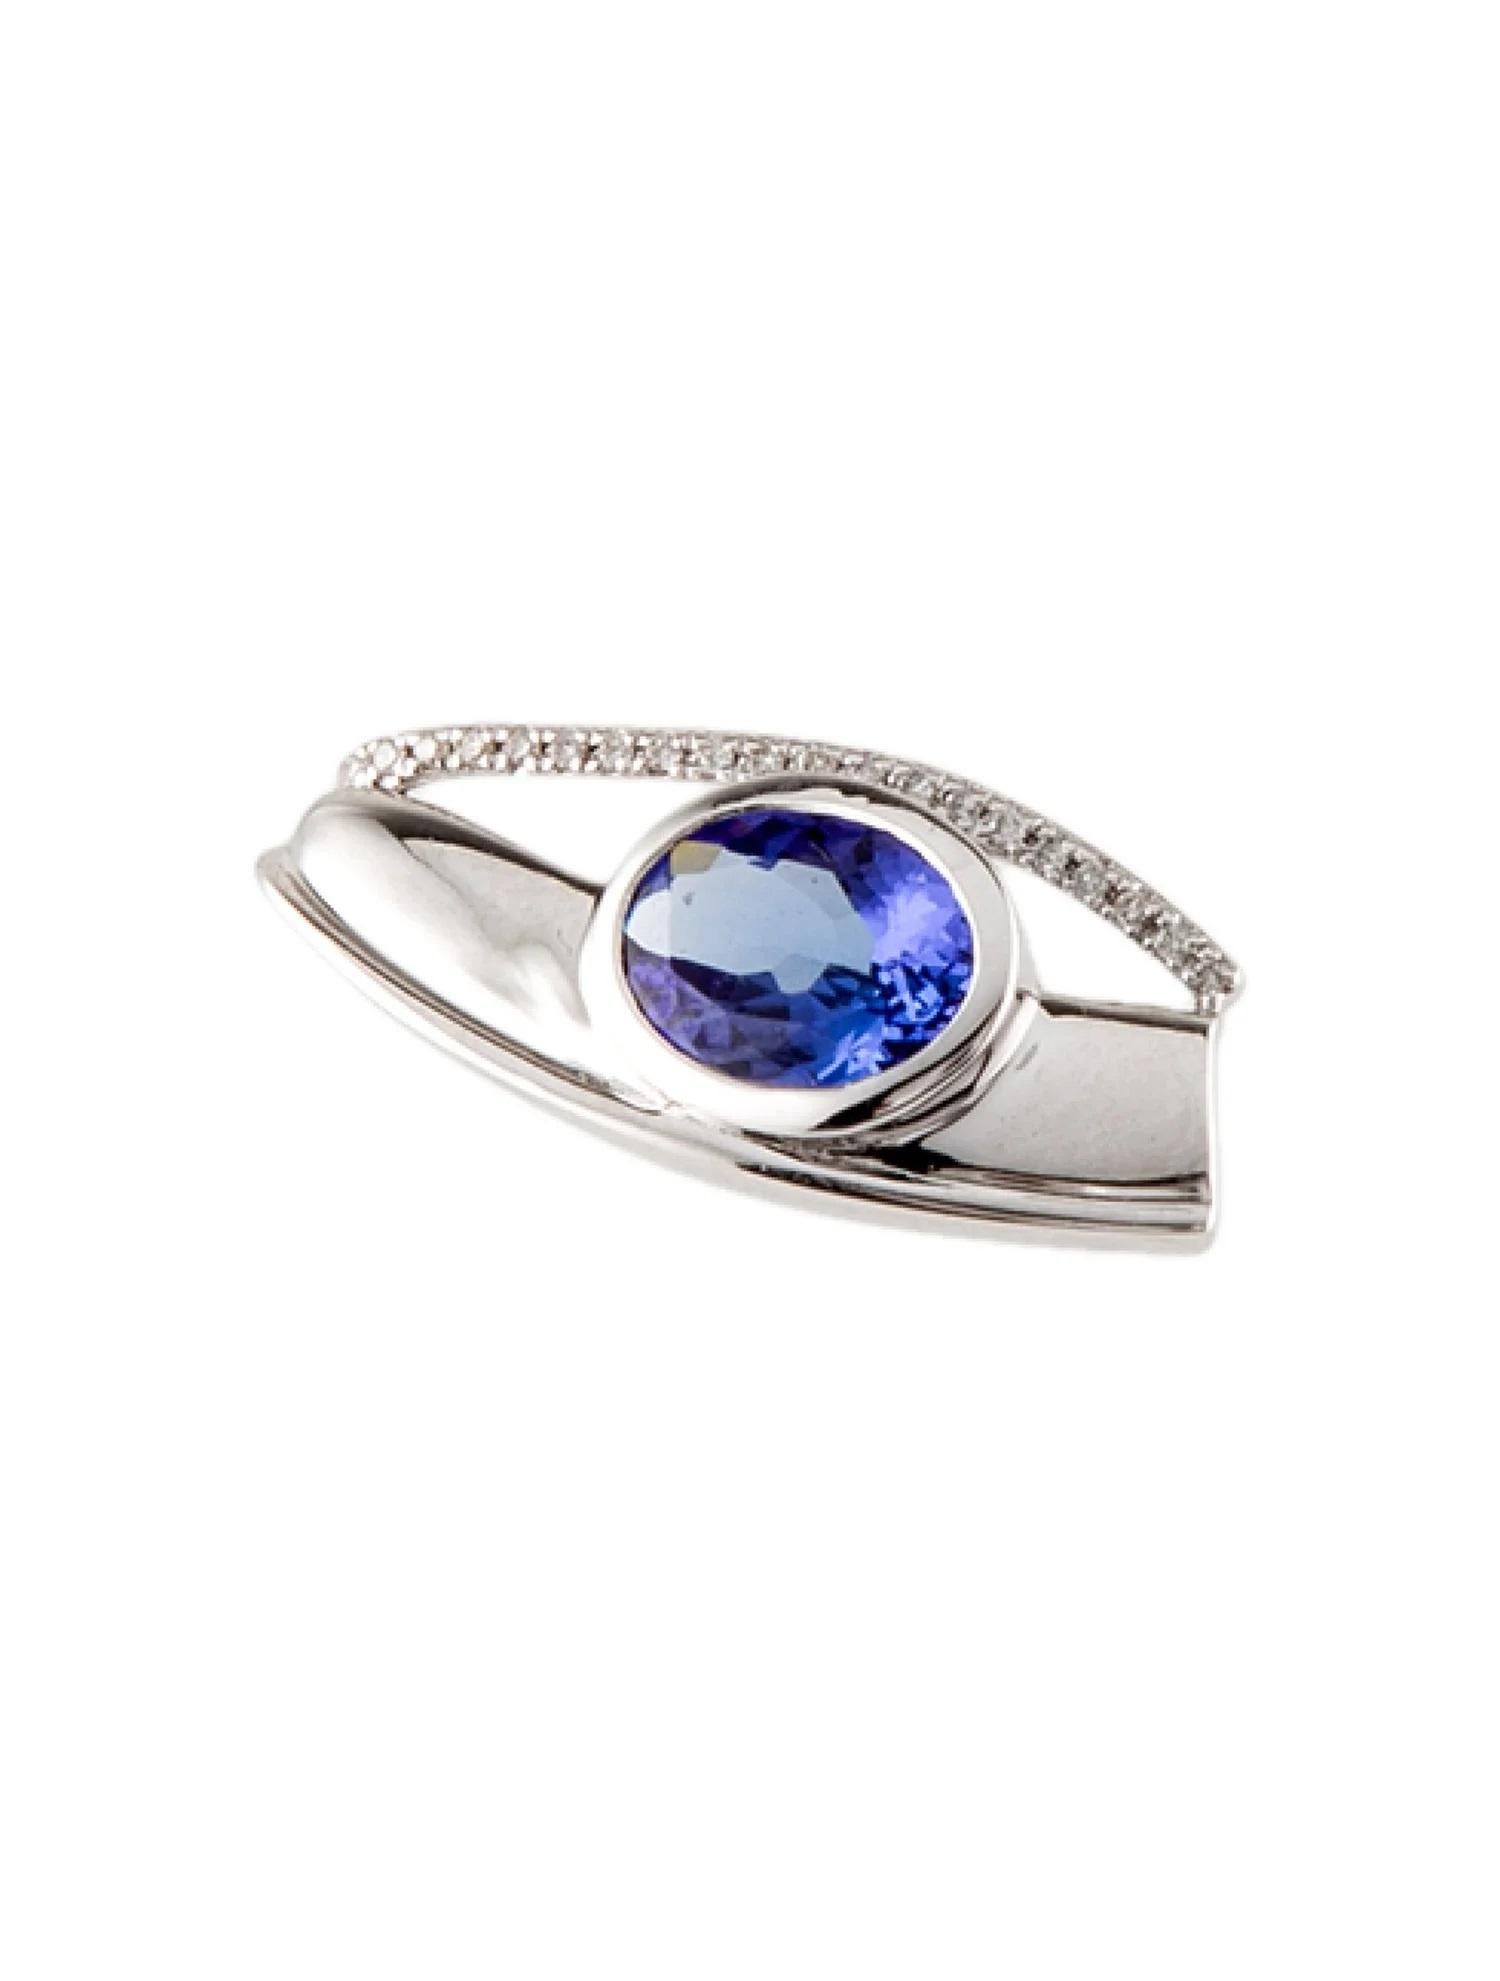 Elevate your jewelry collection with this exquisite pendant crafted from rhodium-plated 18K white gold, featuring a captivating 1.16 carat oval tanzanite surrounded by shimmering diamonds. With its elegant design and vibrant purple hue, this pendant